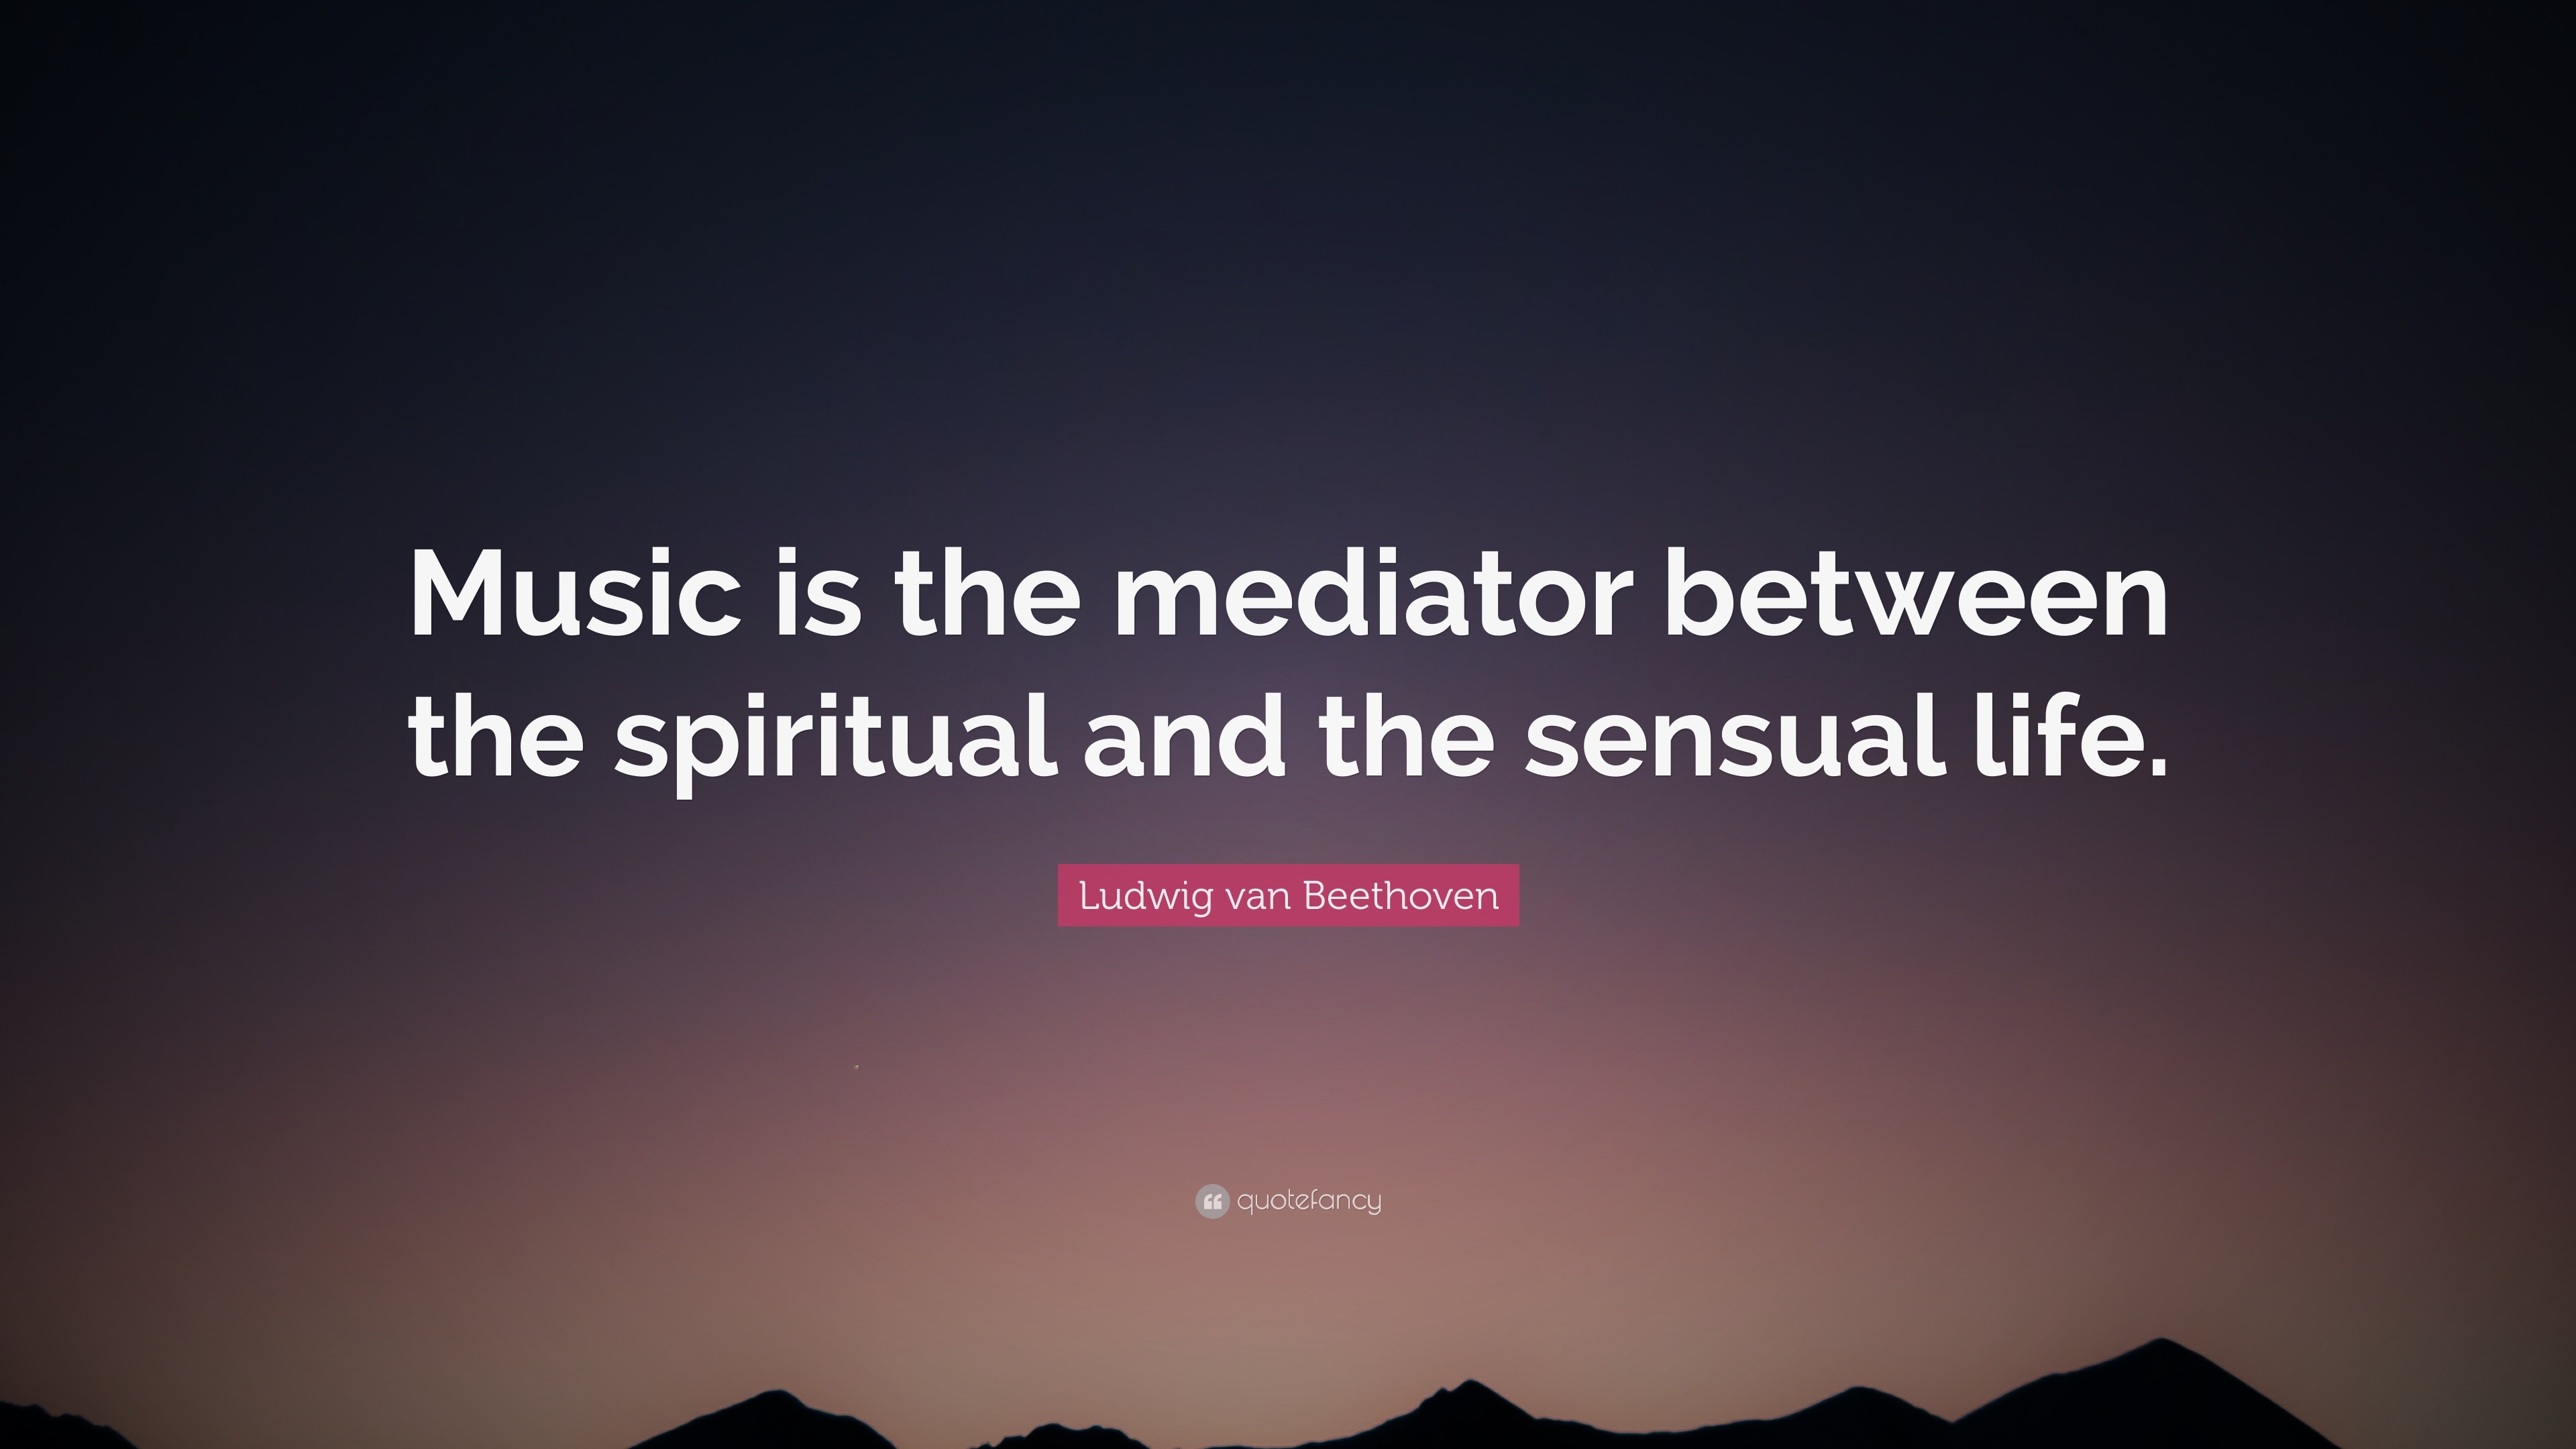 Ludwig Van Beethoven Quote “music Is The Mediator Between The Spiritual And The Sensual Life”